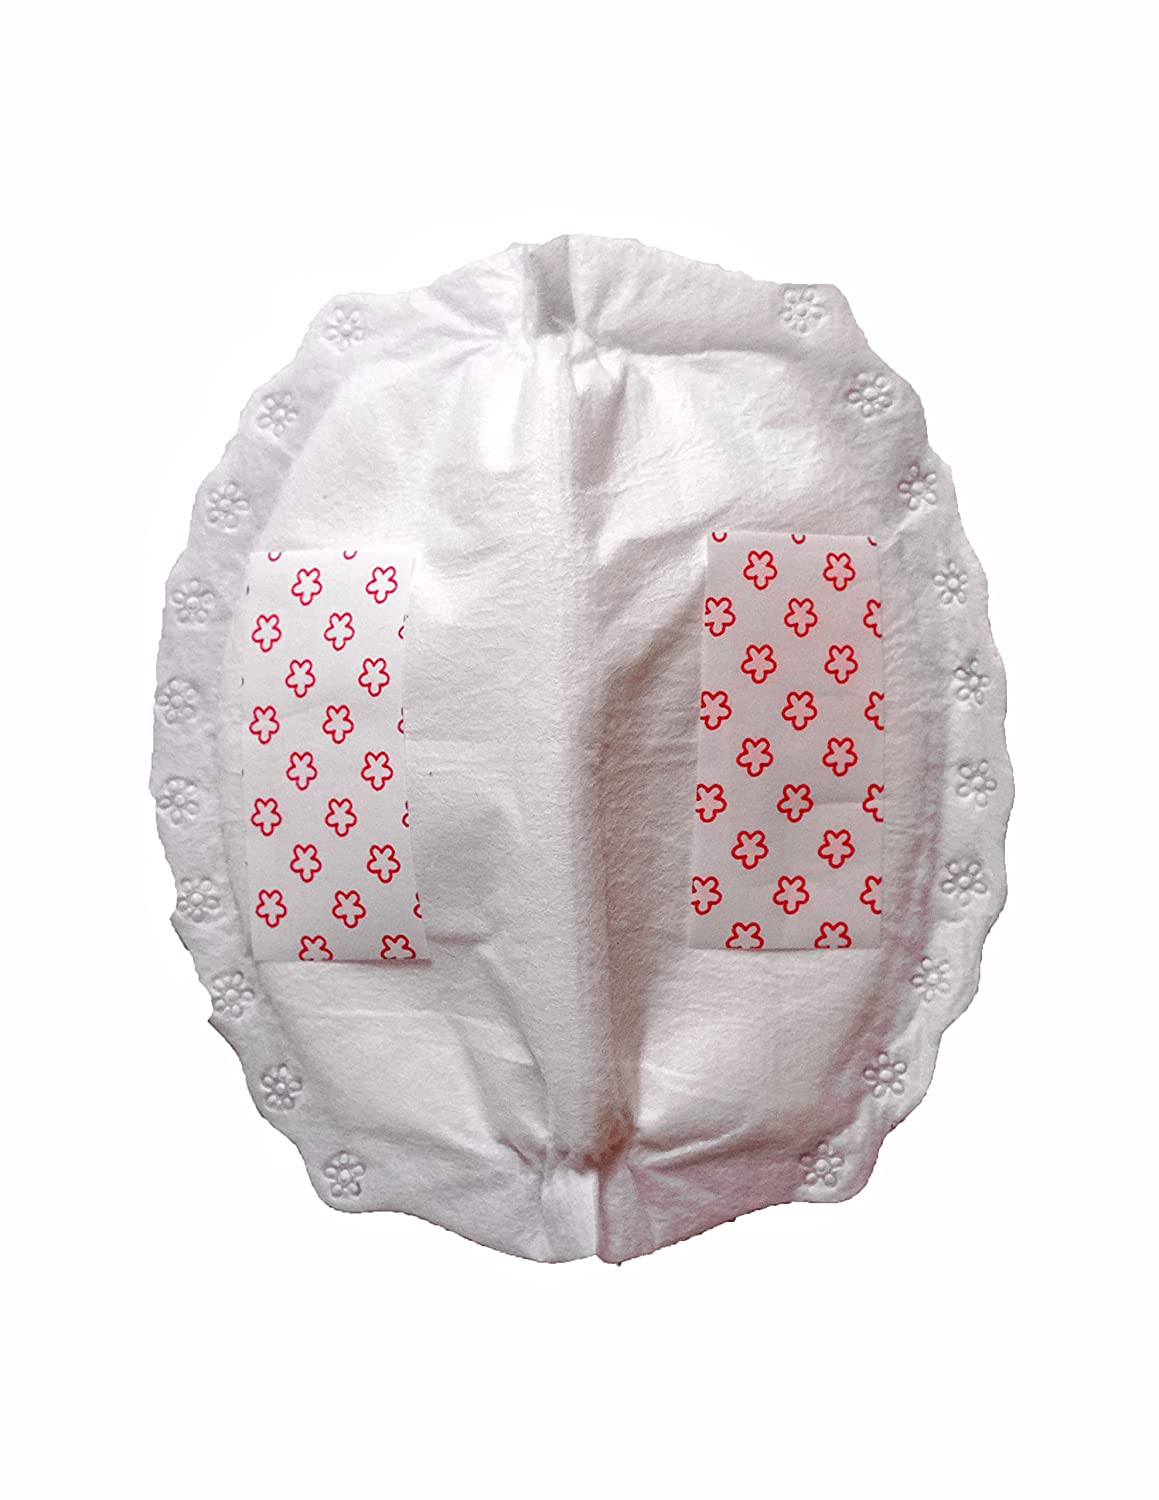 Maternity and Nursing Breast Pads - Pack of 12